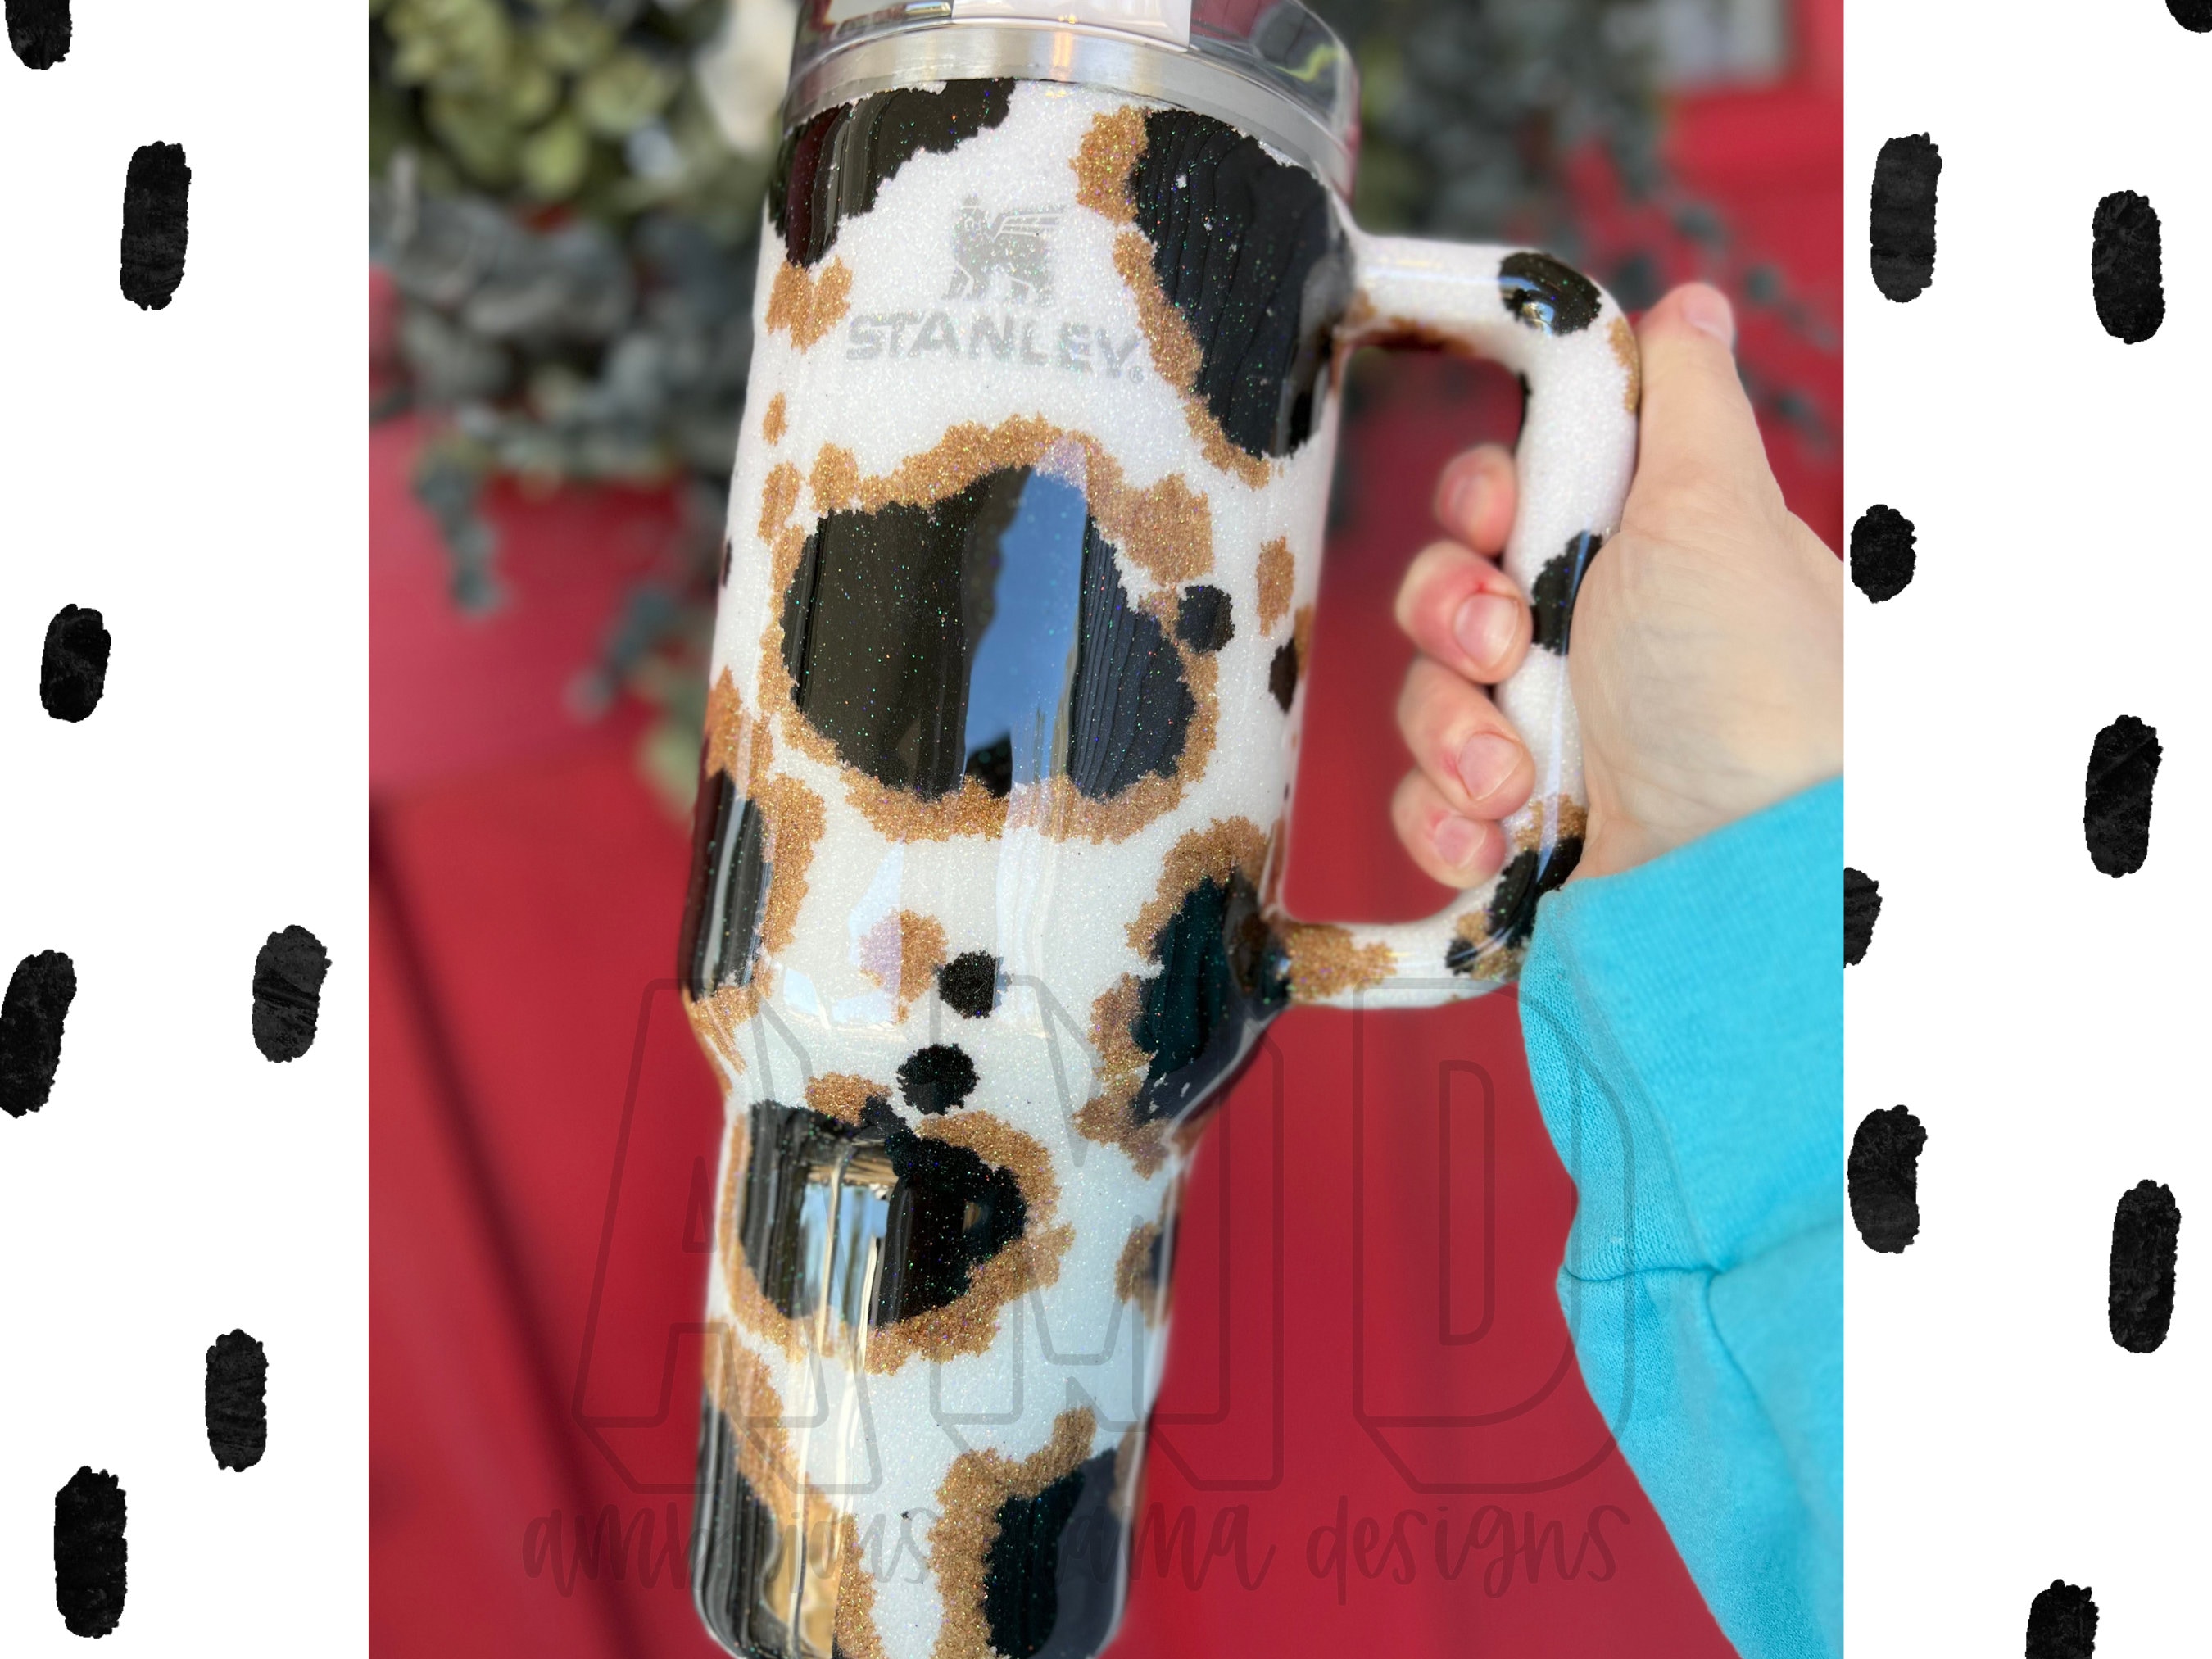 Black/White Cow Print Tumbler Cup with Handle - Southern Trends